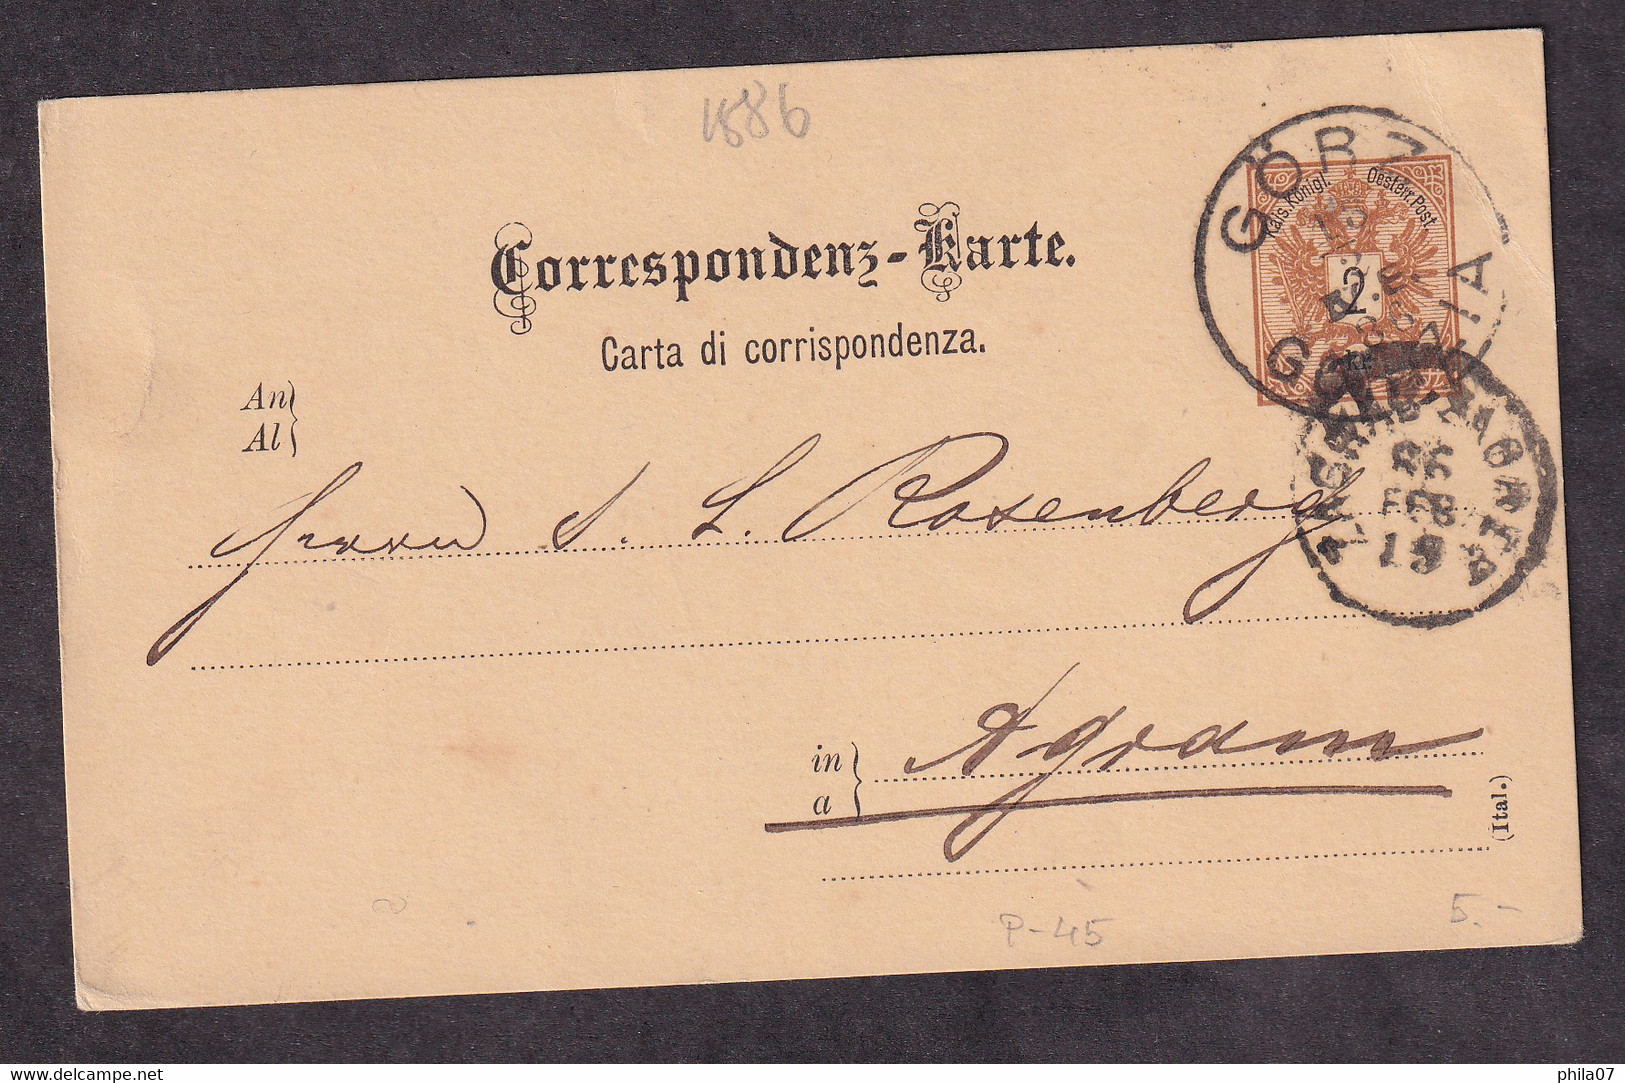 AUSTRIA - Bilingual Stationery, German/Italian Language, Mi.No. P-45. Sent From Gorz To Agram 1886. - 2 Scans - Covers & Documents